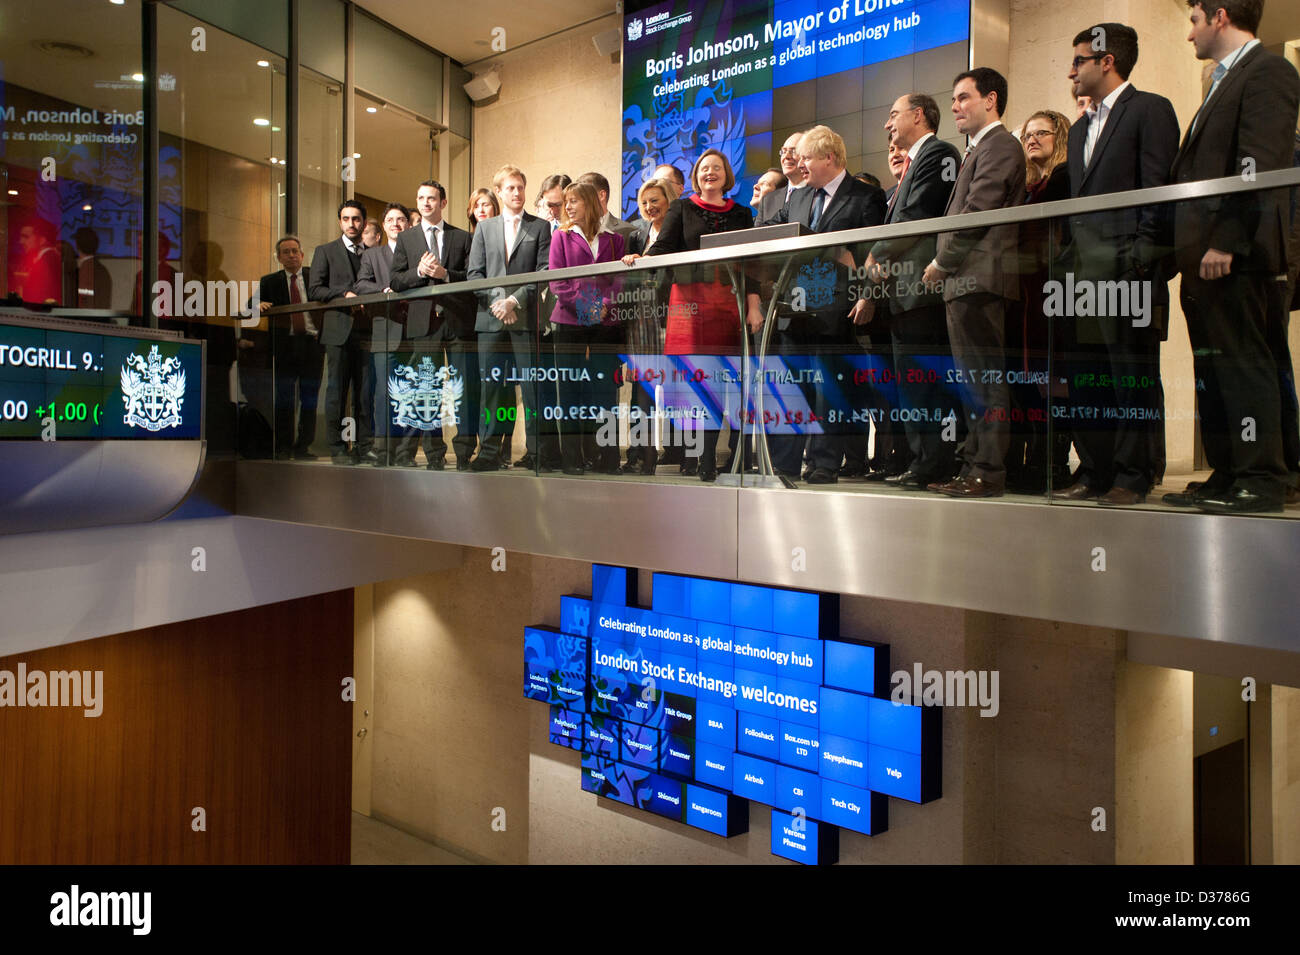 London, UK. 12th February 2013. The Mayor of London, Boris Johnson joins Xavier Rolet, CEO of London Stock Exchange Group to open the trading day, to encourage more science and technology companies to list in the capital. Credit: pcruciatti / Alamy Live News Stock Photo